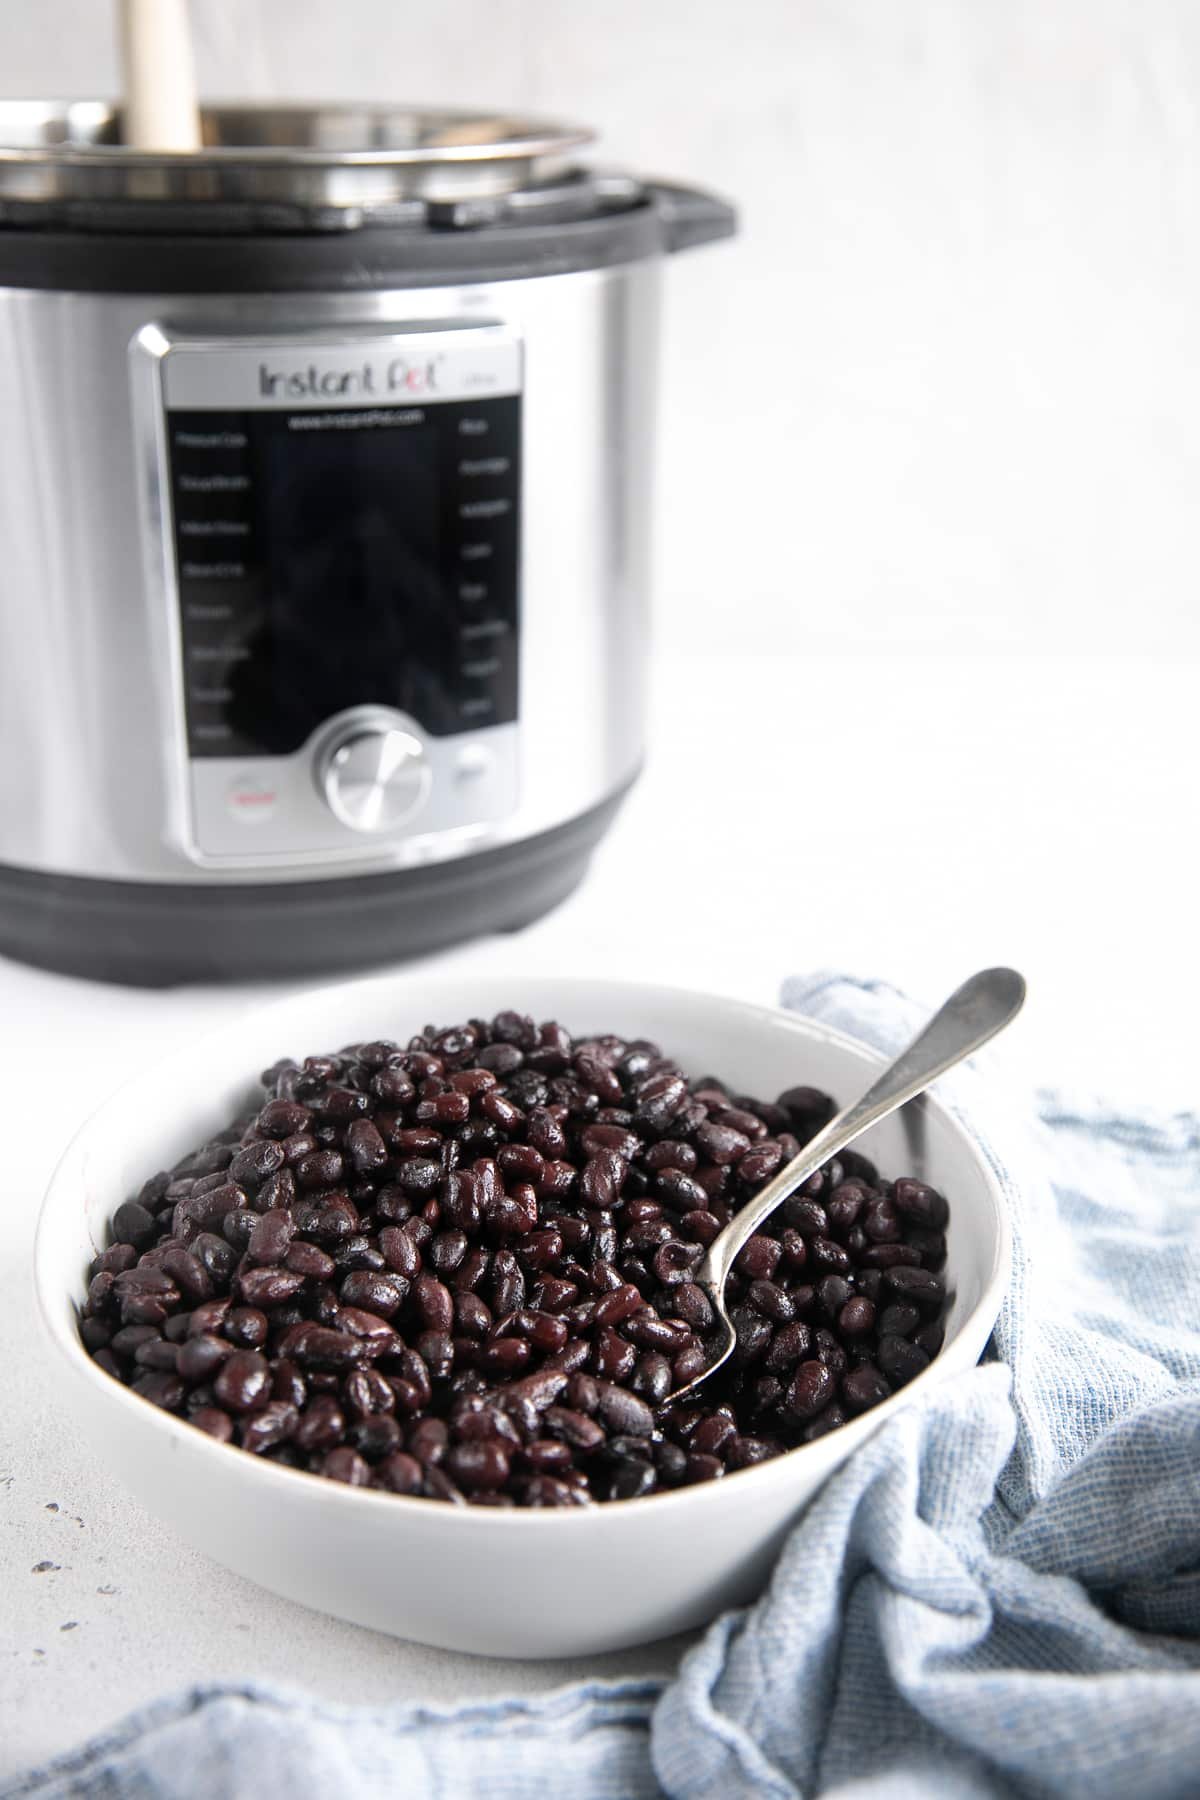 How To Cook Black Beans in a Pressure Cooker (Instant Pot